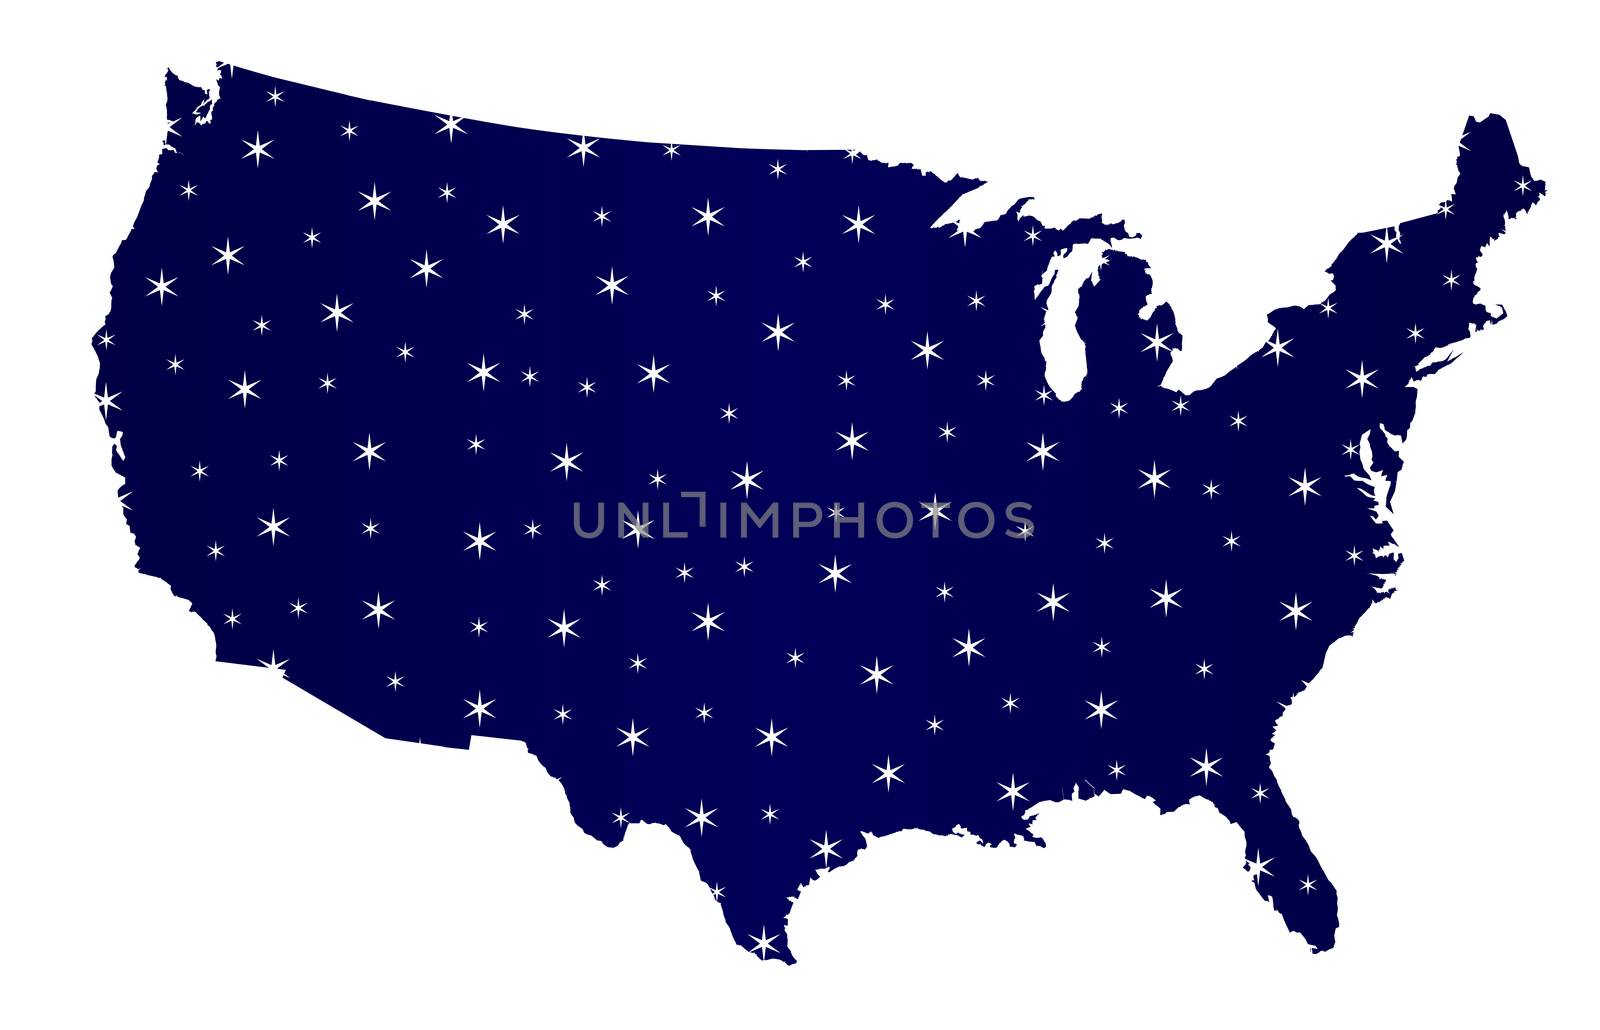 A stary silhouette map of The United States of America over a white background